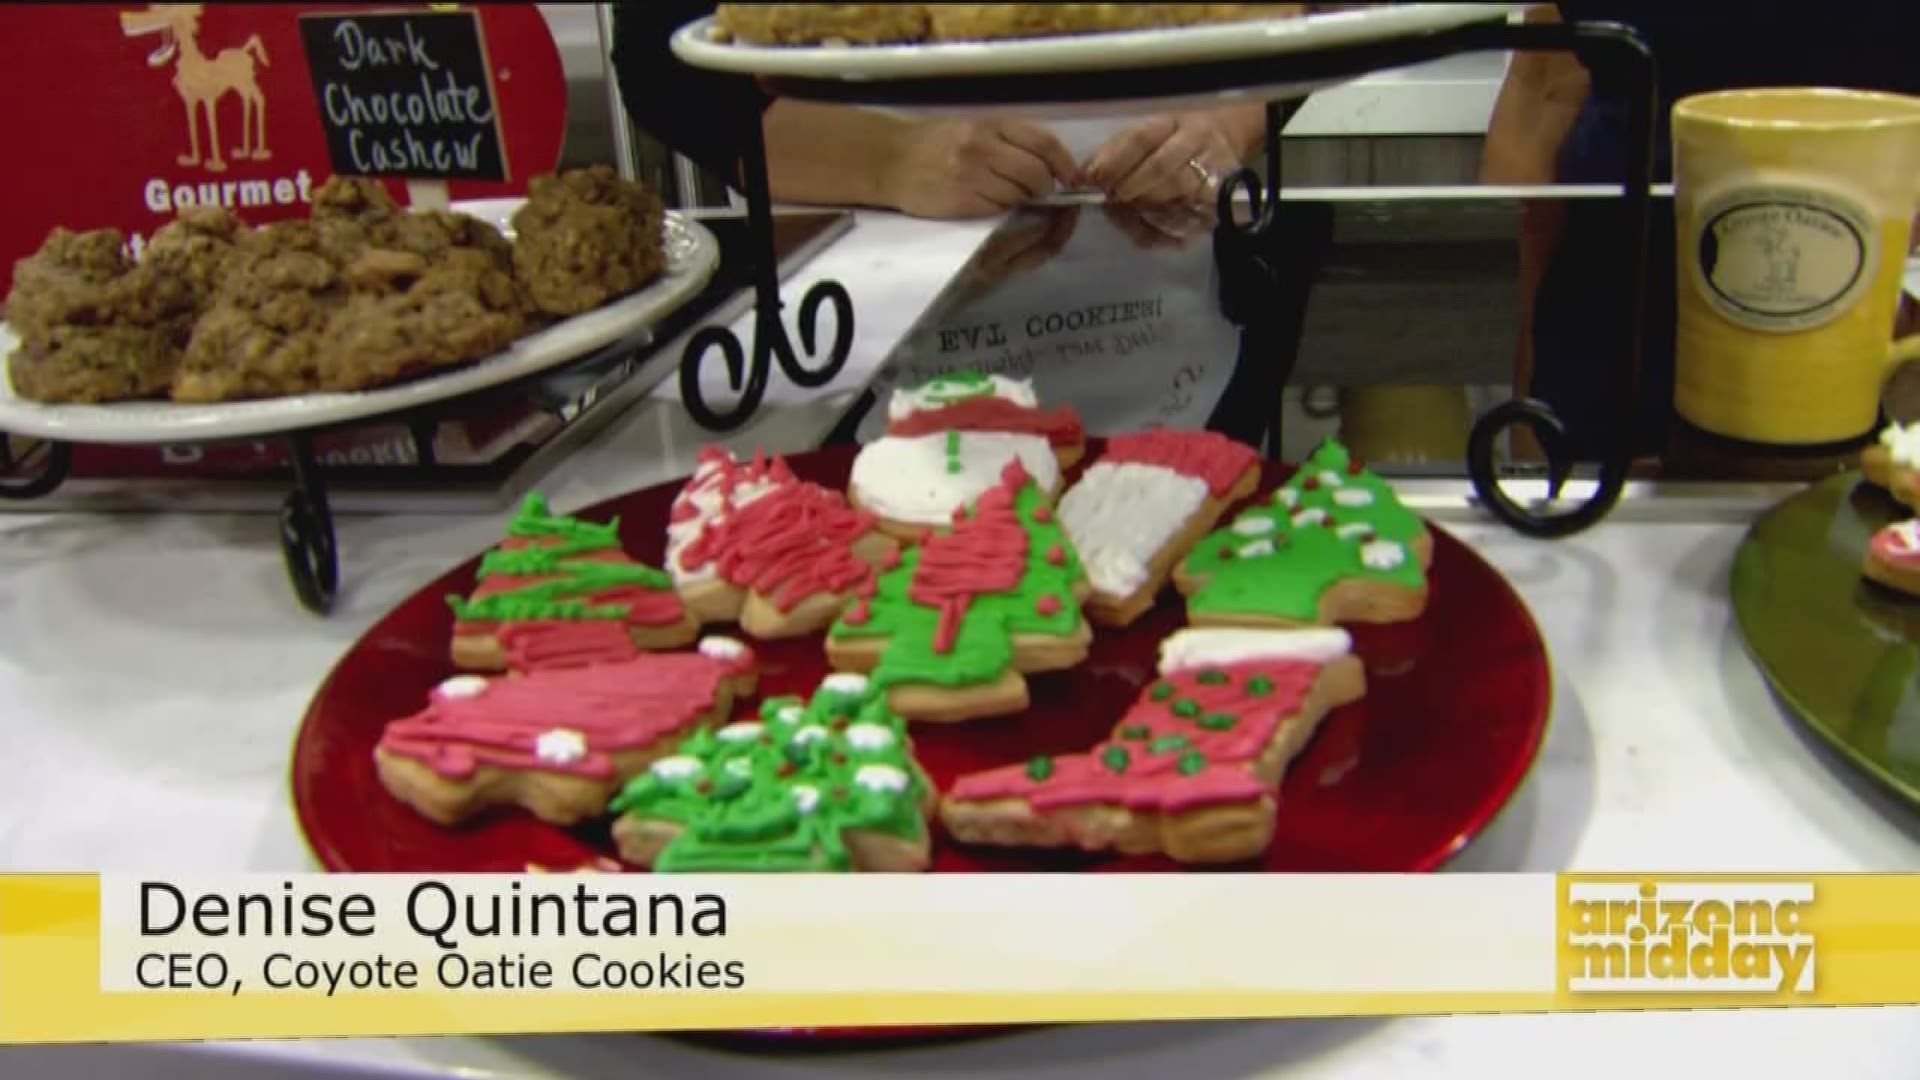 Denise Quintana from Coyote Oatie Cookies brought by with some yummy treats and to talk about their Christmas in July celebration.